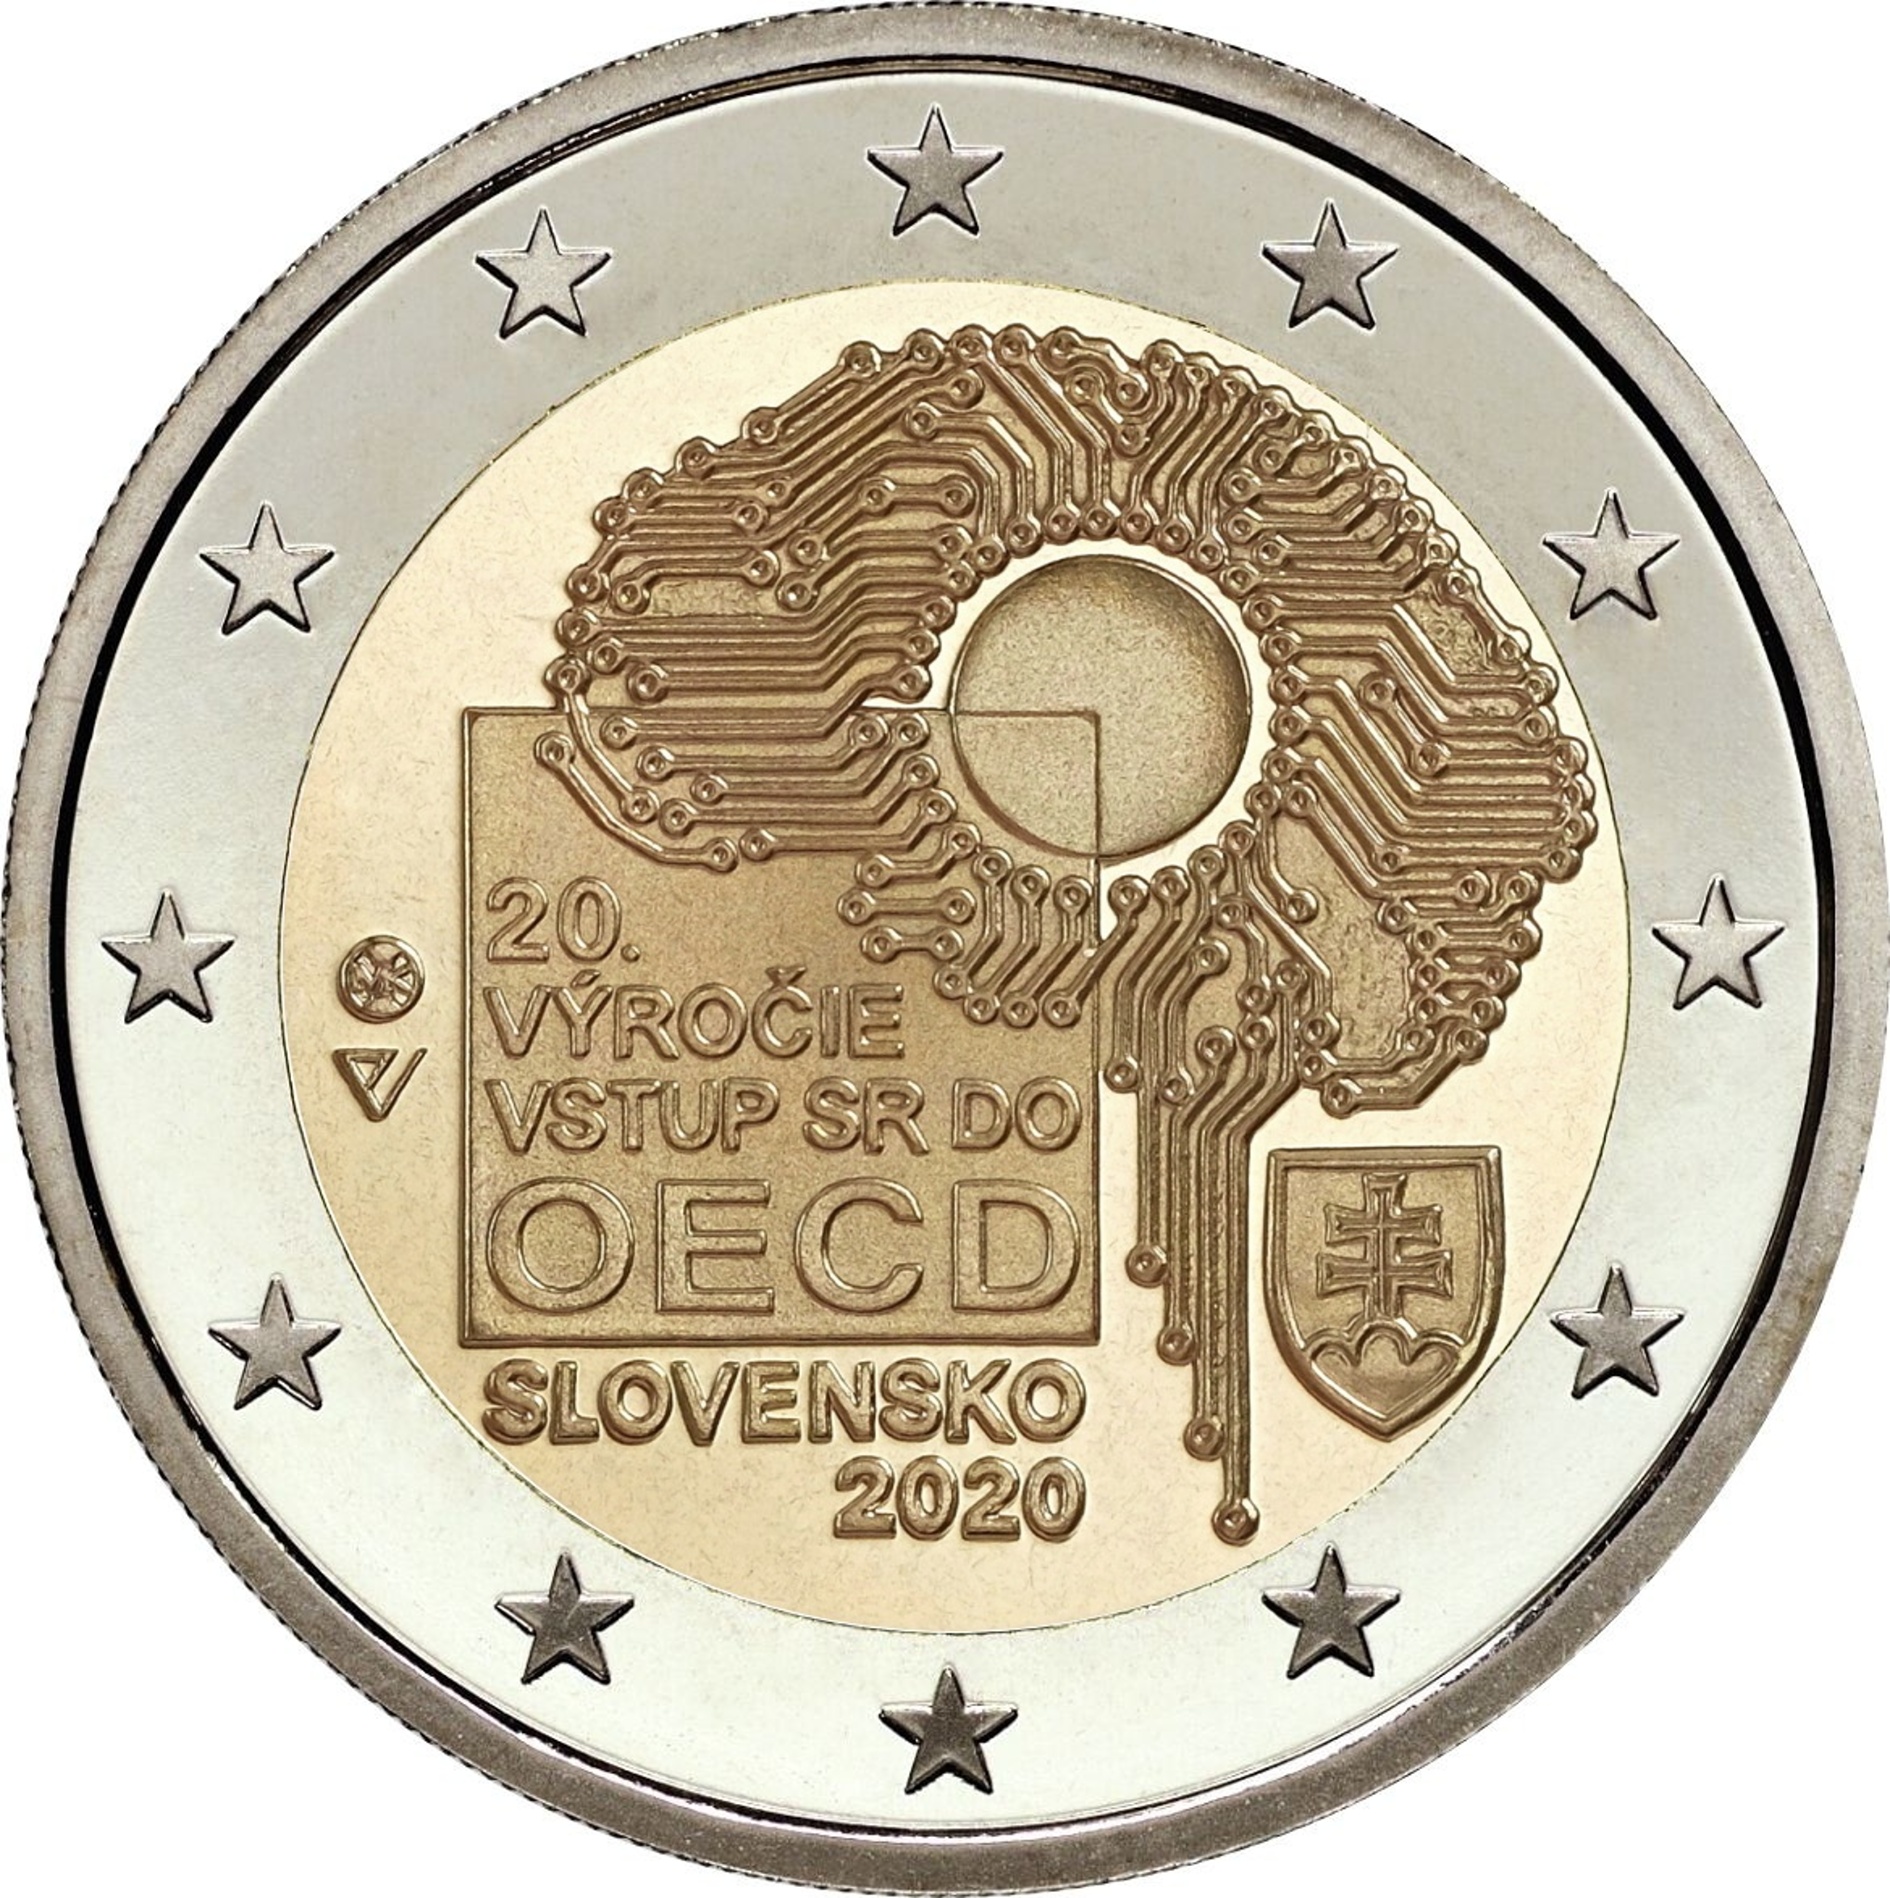 Banknotes and coins, 20th anniversary of the accession of the Slovak Republic to the Organisation for Economic Co-operation and Development (OECD)